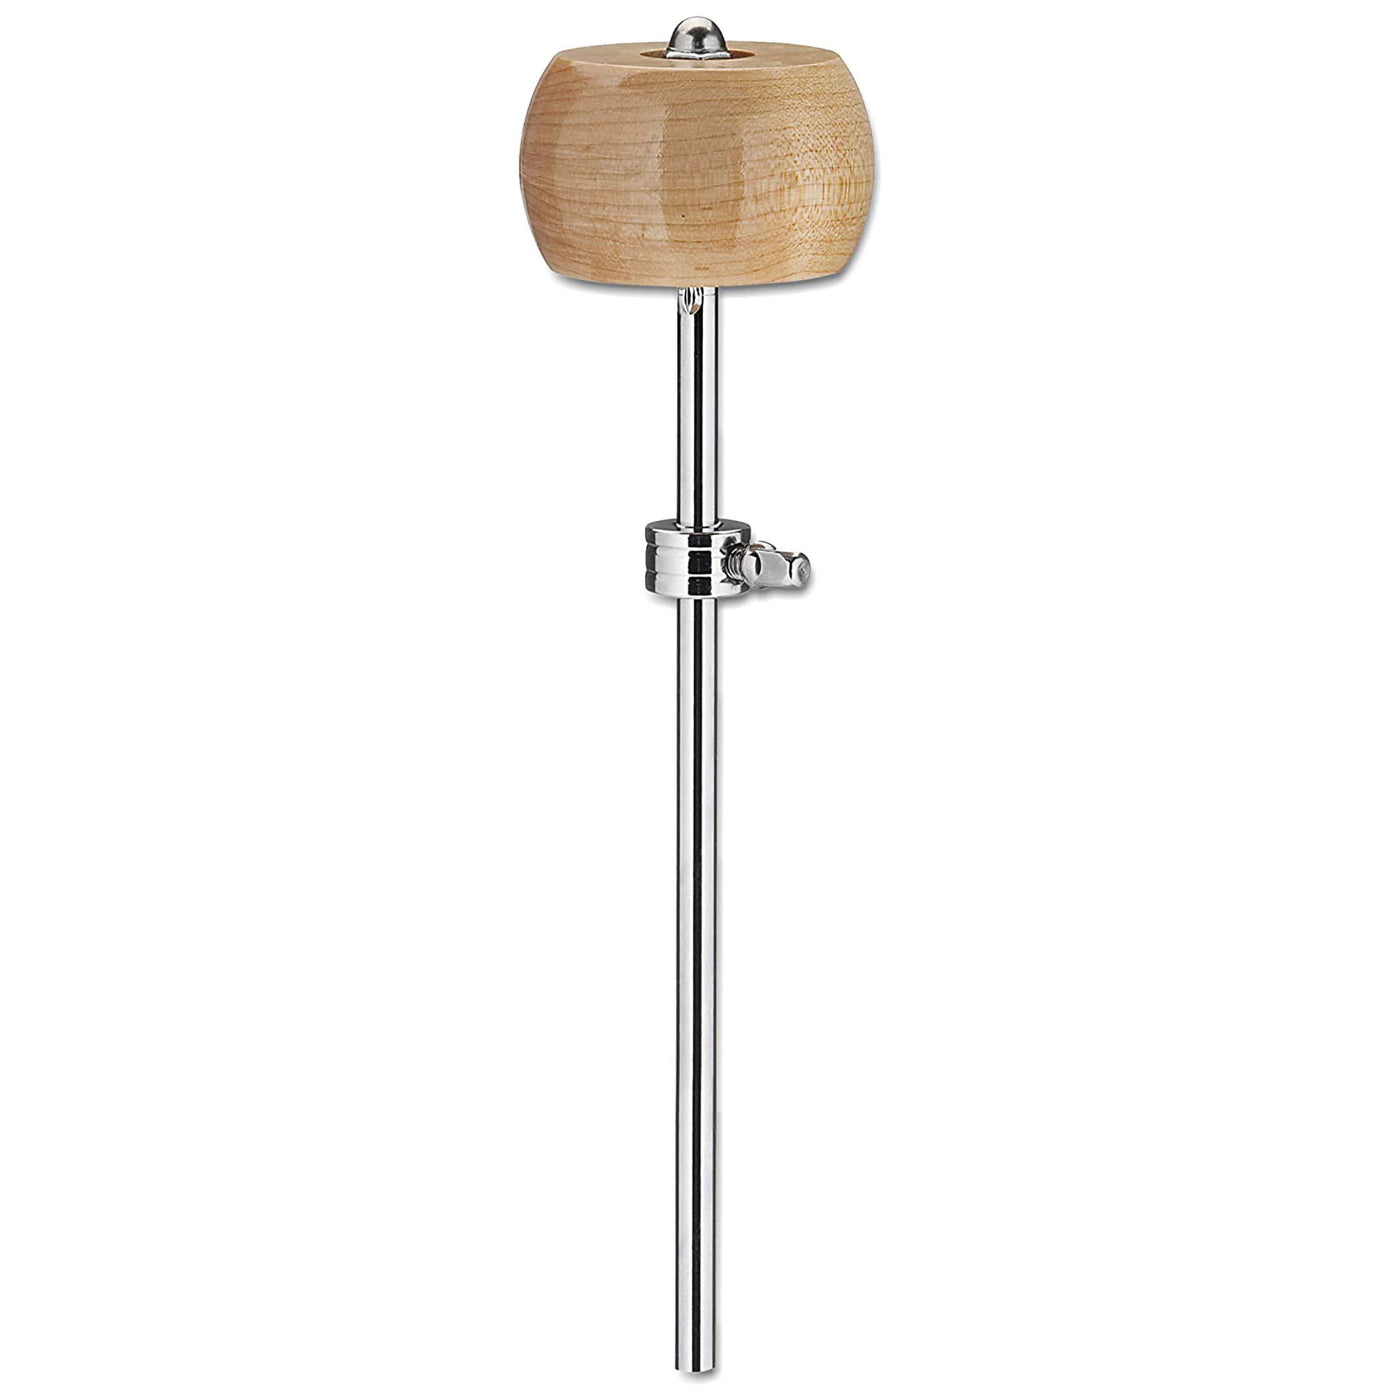 DW Solid Maple Wood Bass Drum Beater